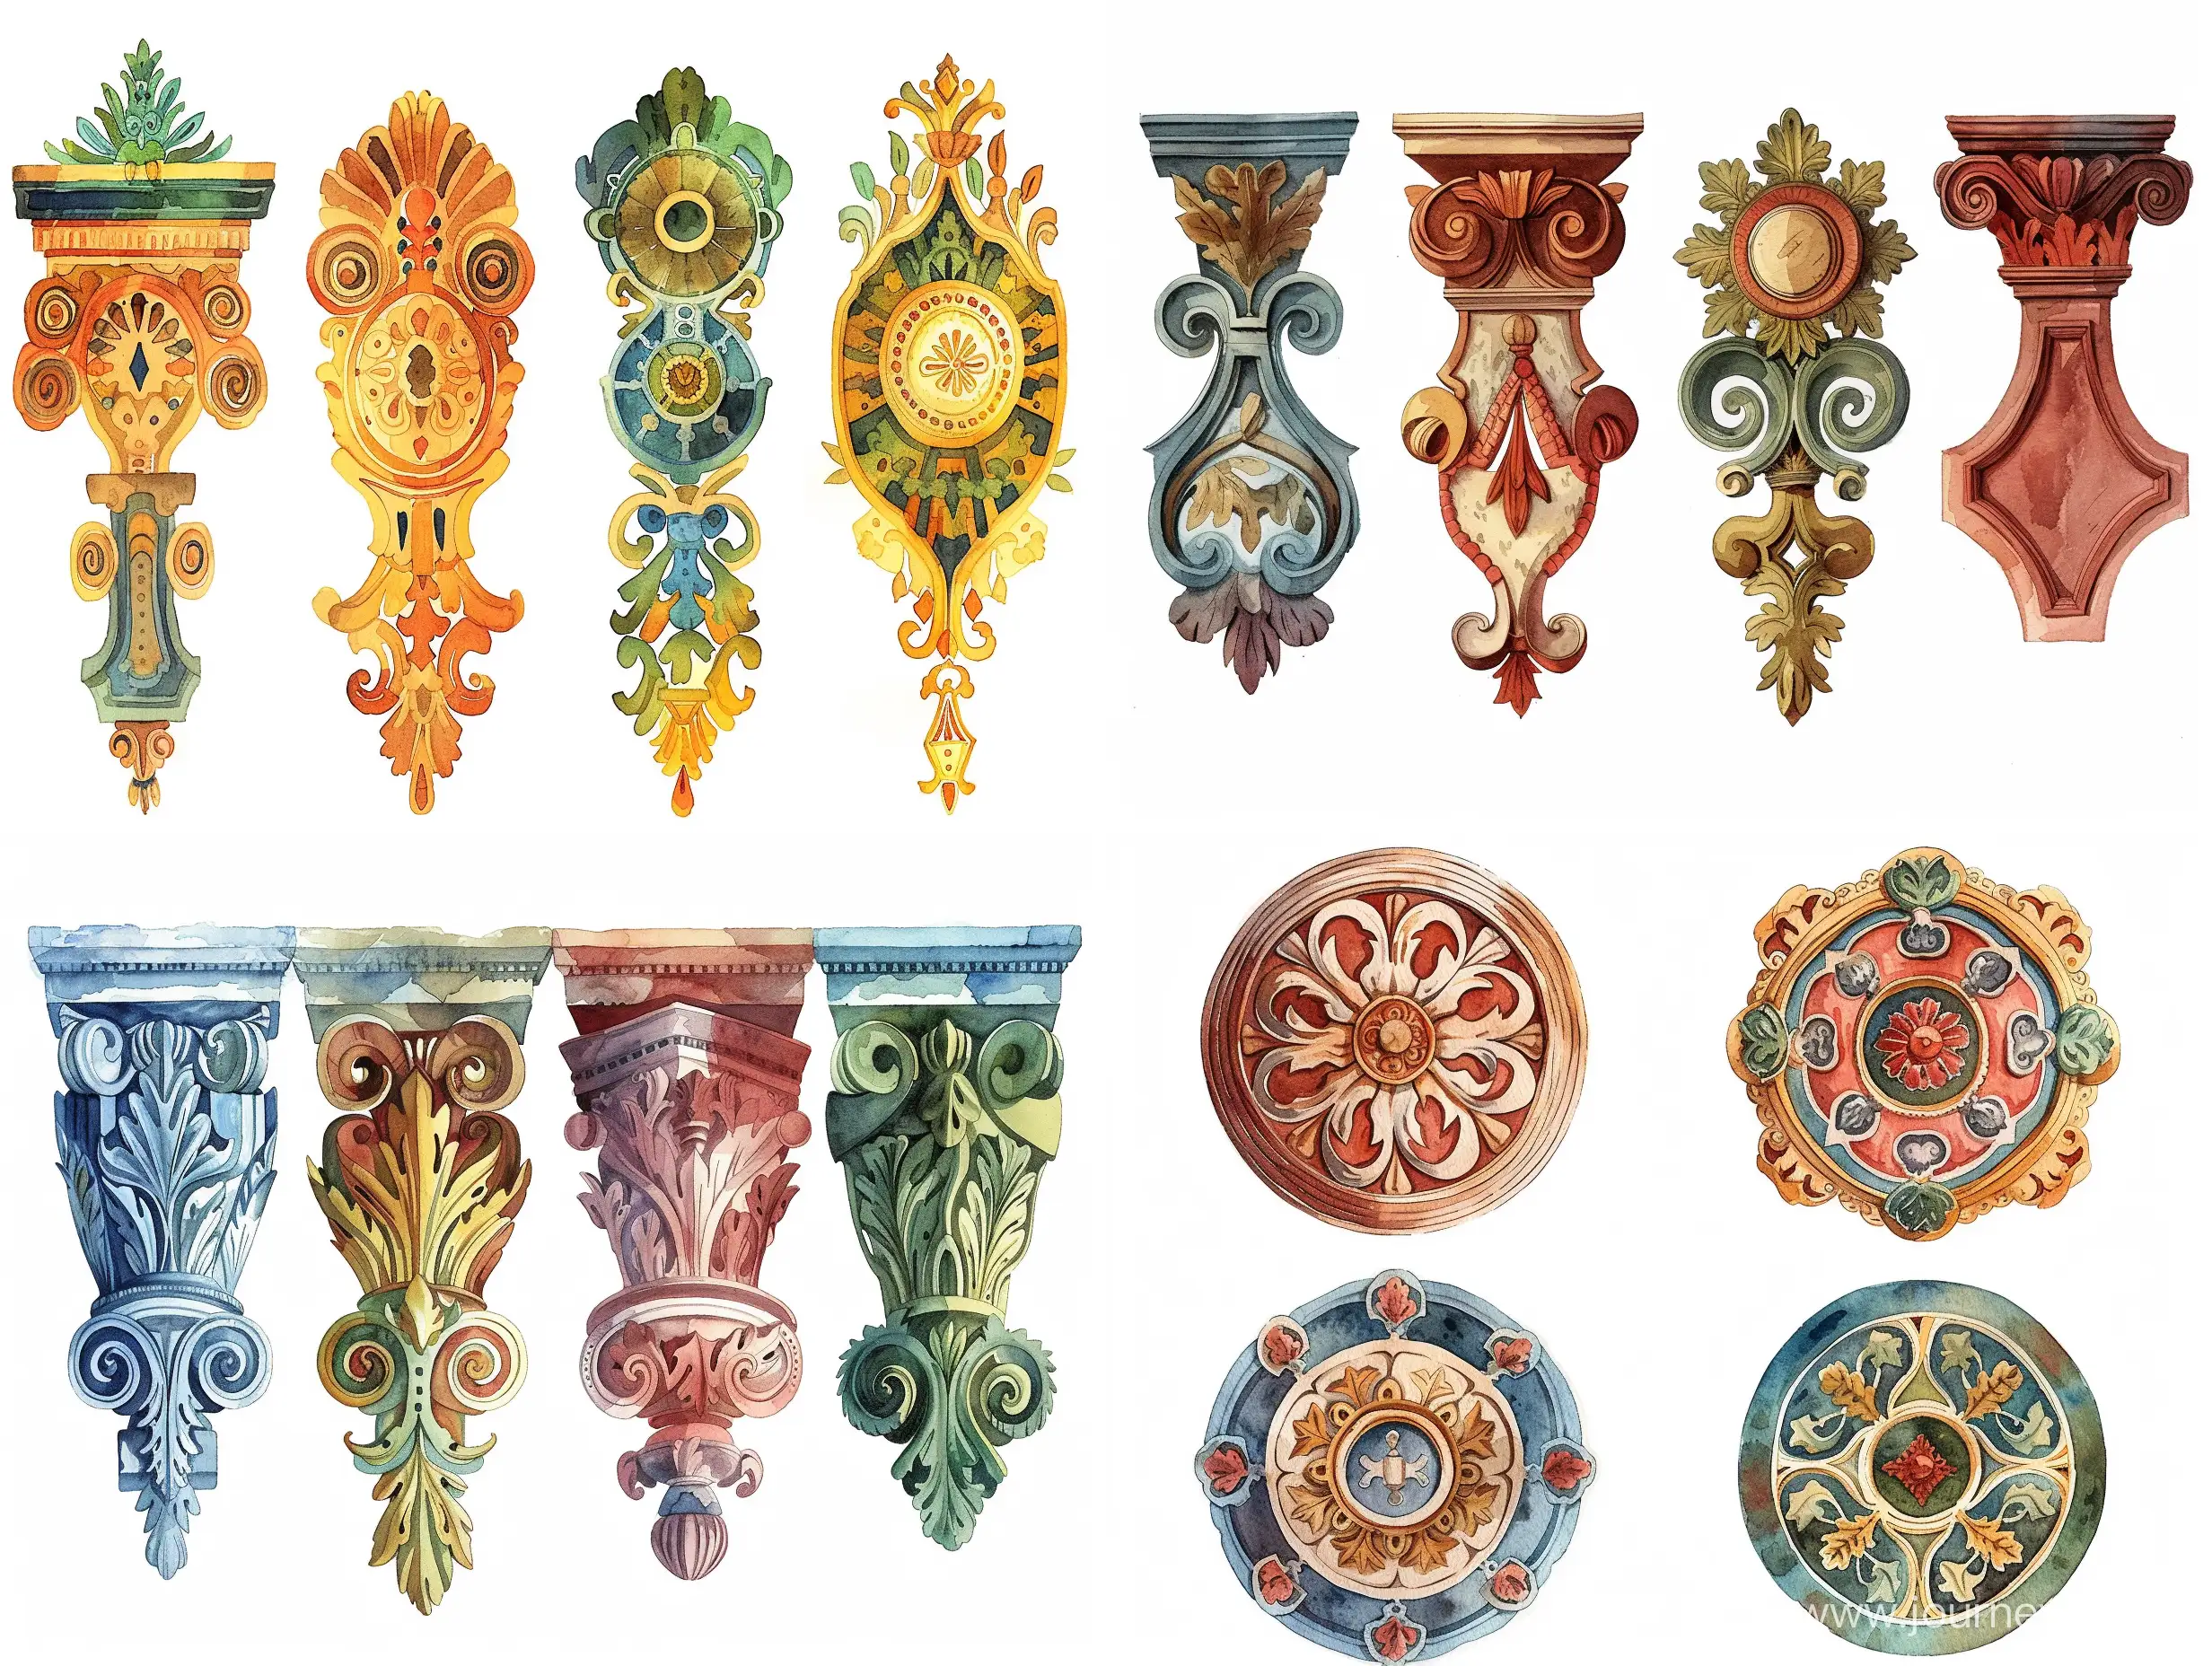 Stylized-Caricatures-Four-Variations-of-Ancient-Roman-Ornaments-in-Decorative-Watercolor